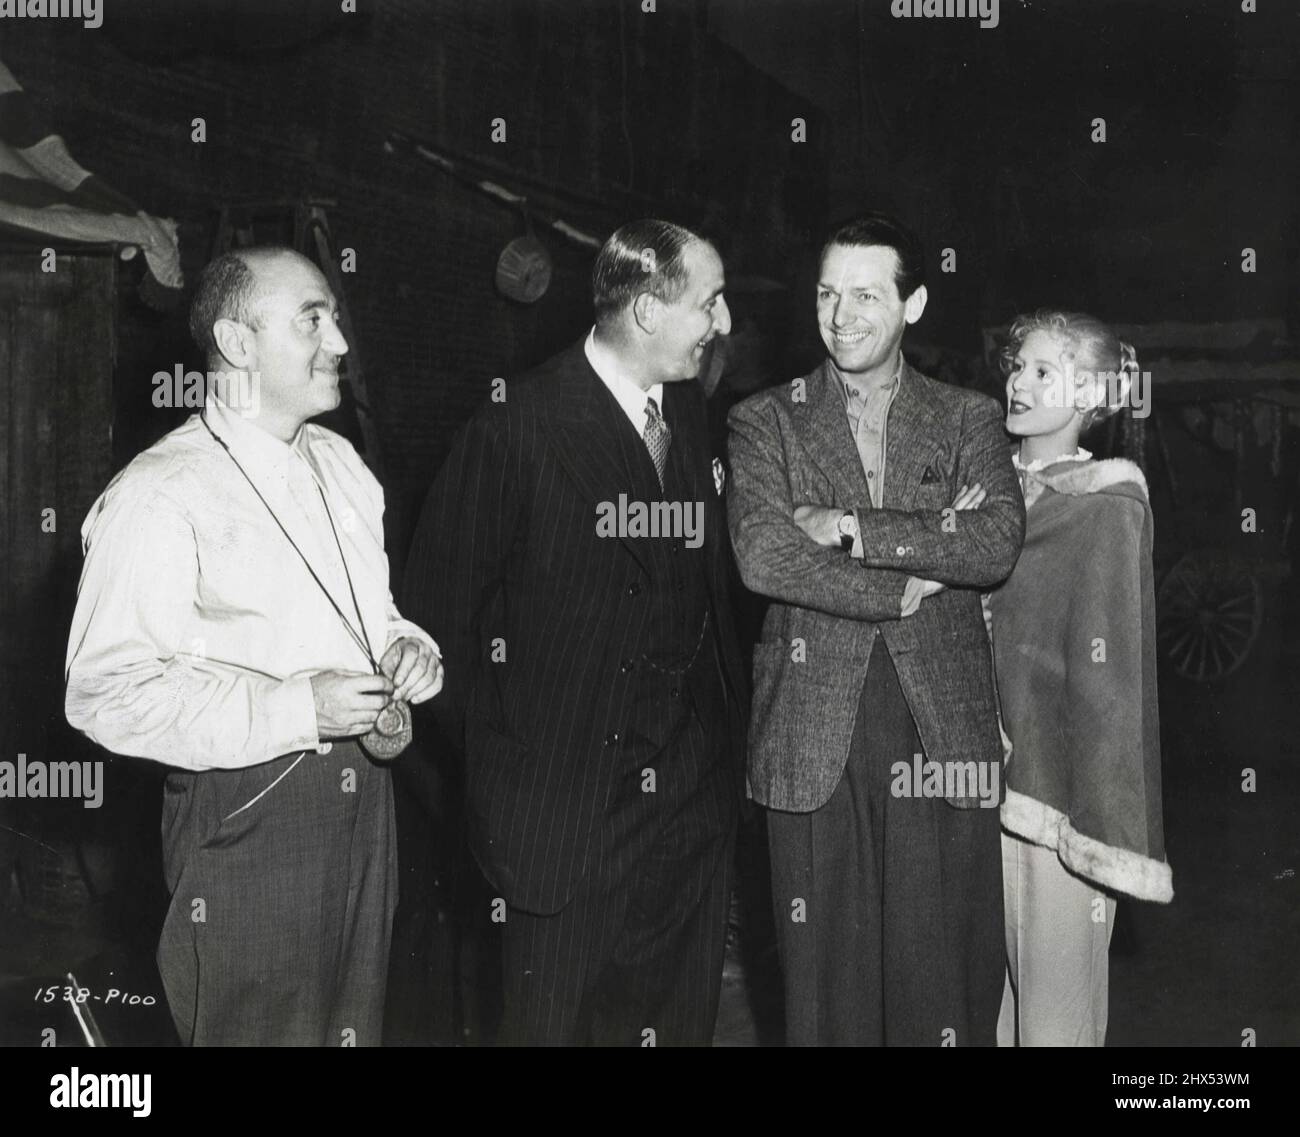 International relations get a healthy pickup when British film magnate, J. Arthur Rank (second from left) visits Douglas Fairbanks on the set of 'The Exile' at Universal-International and meets Doug's new discovery, Paule Croset (right), who is Swiss, and Director Max Ophuls, who was French before coming to this country. December 23, 1947. (Photo by Universal-International). Stock Photo